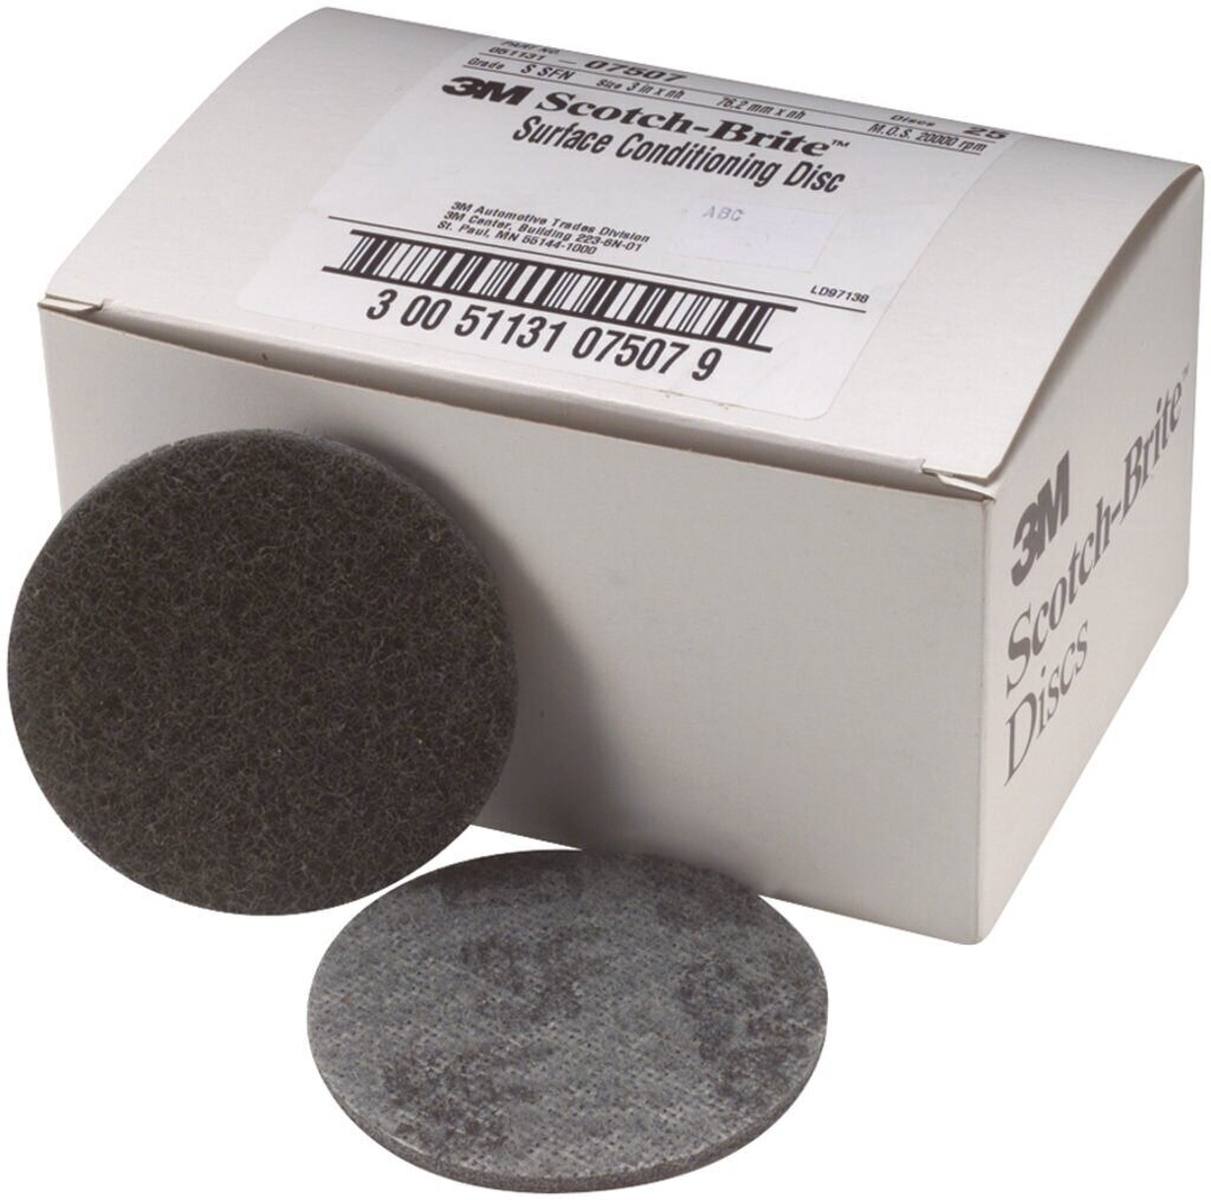 3M Scotch-Brite non-woven disc SC-DH without centering, grey, 115 mm, S, sfn #48560